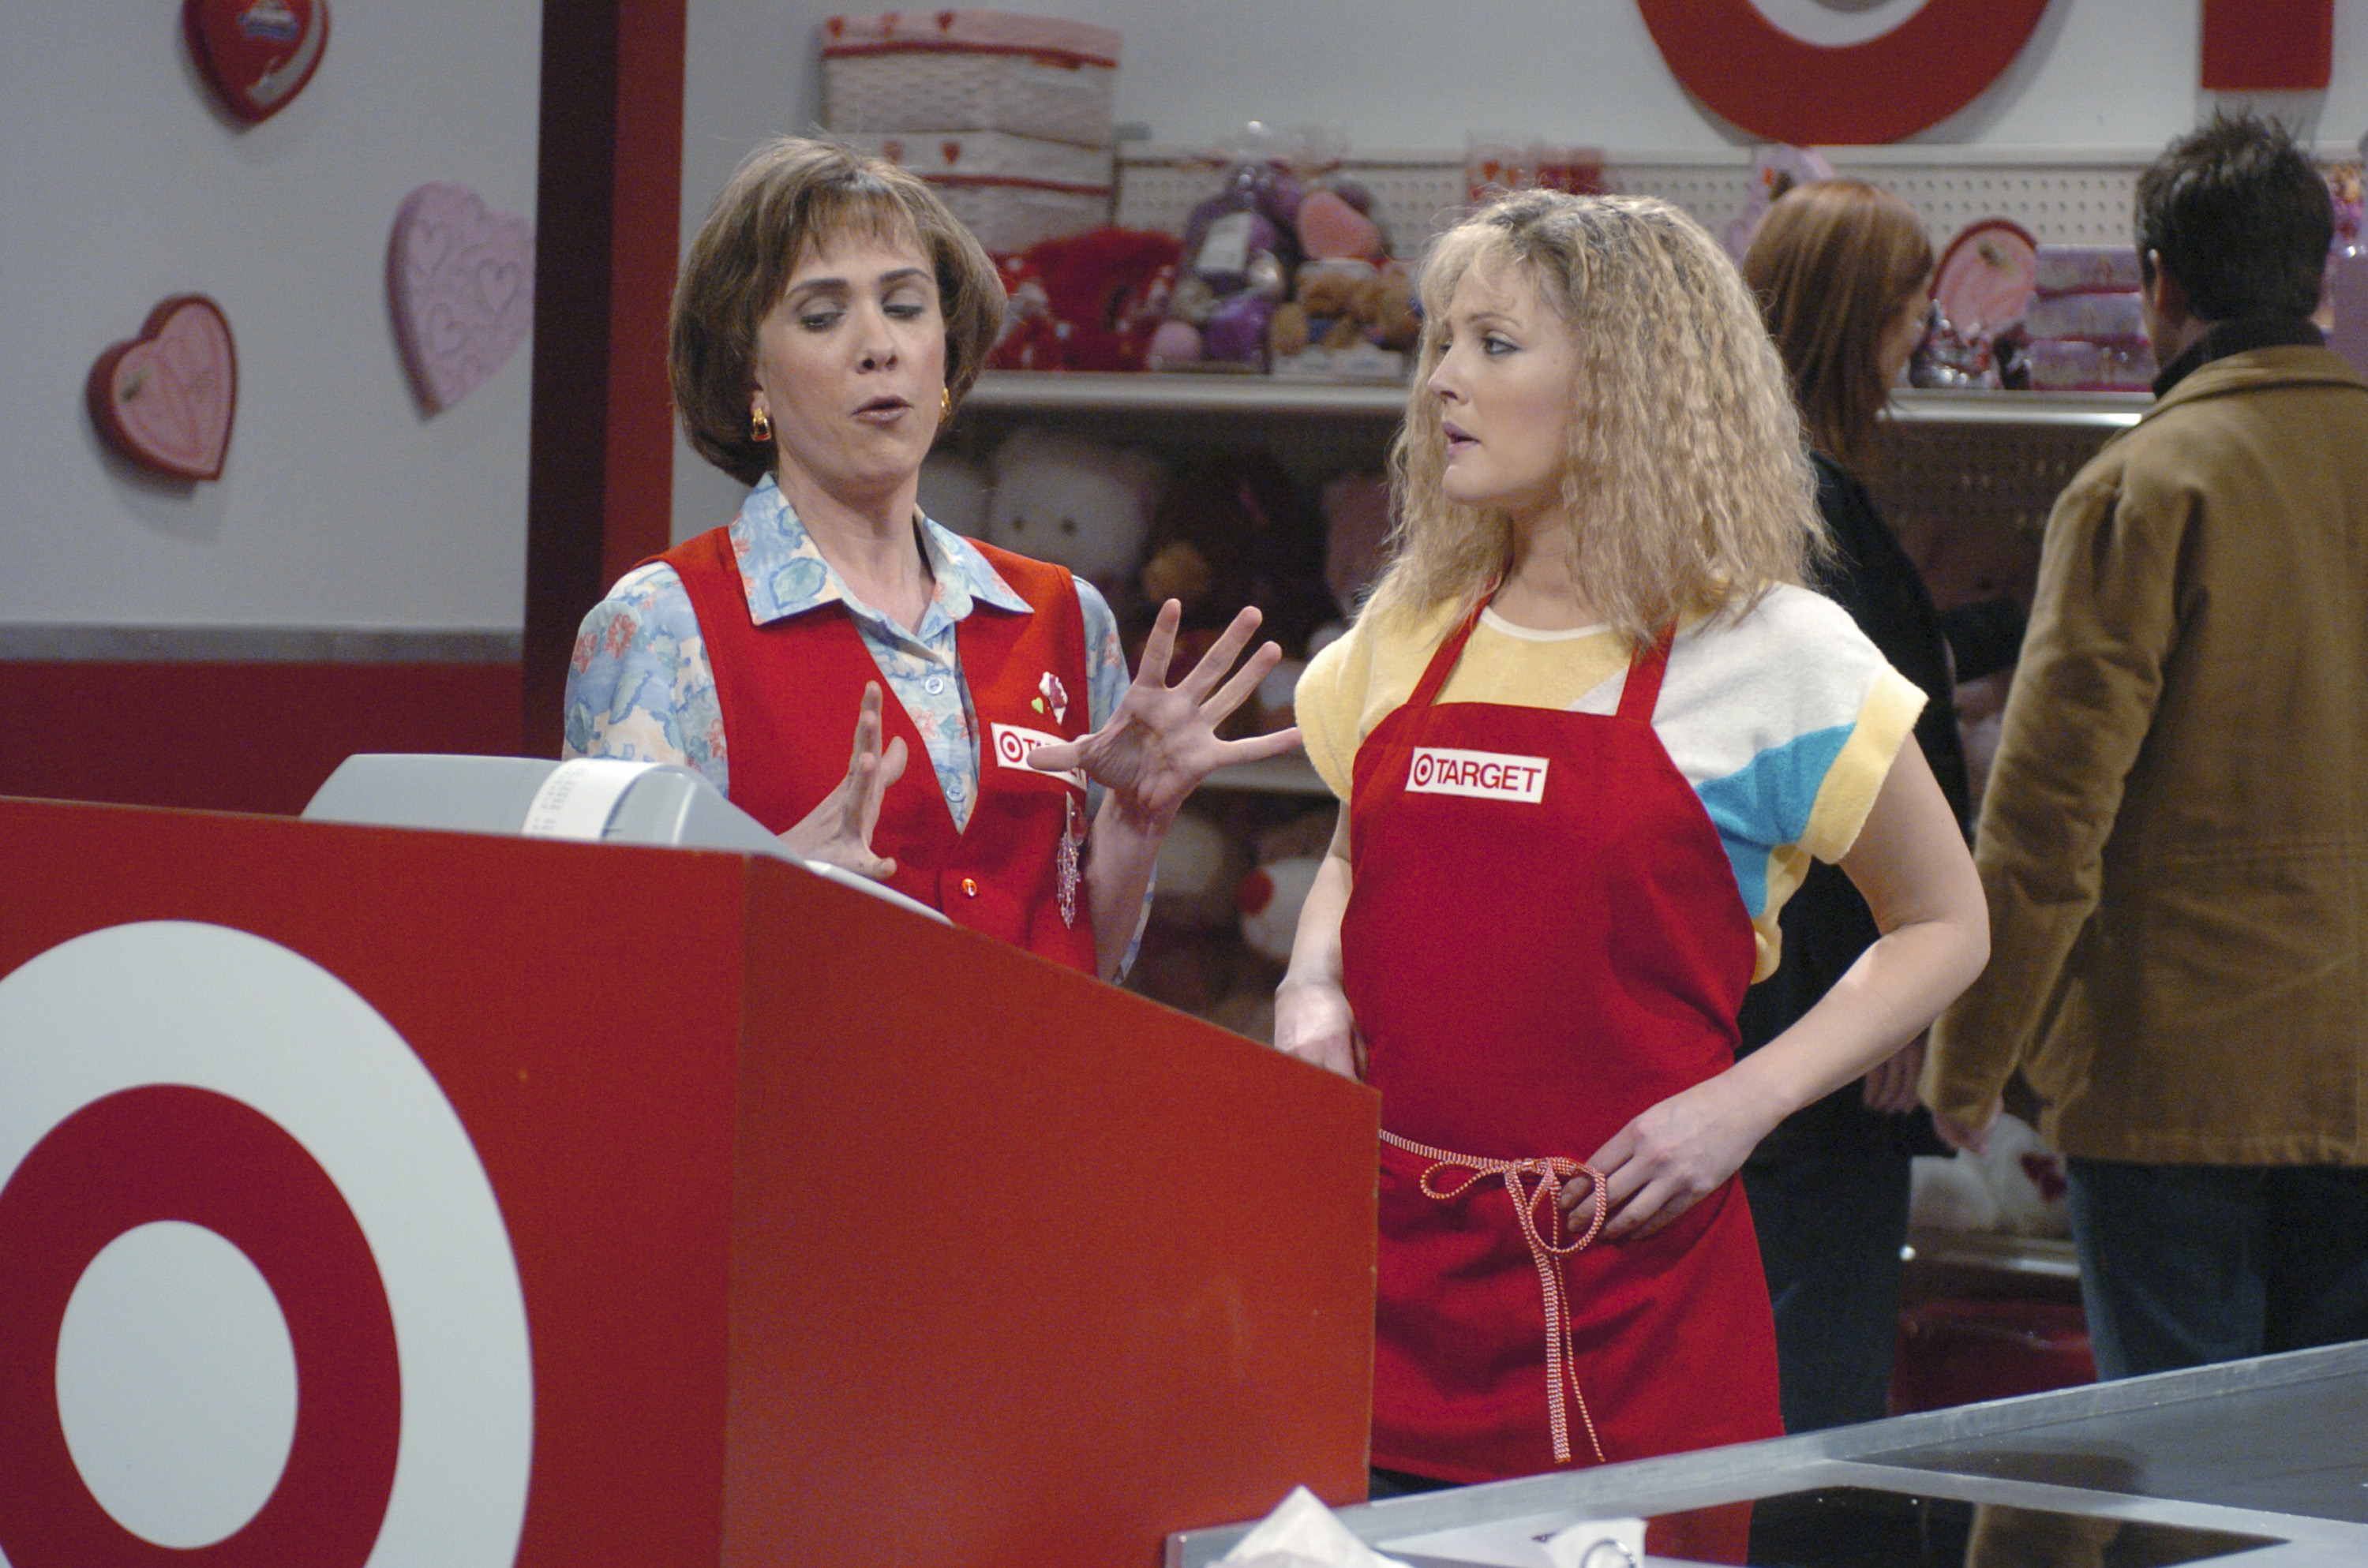 Kristen is set to promote Target's latest customer deal